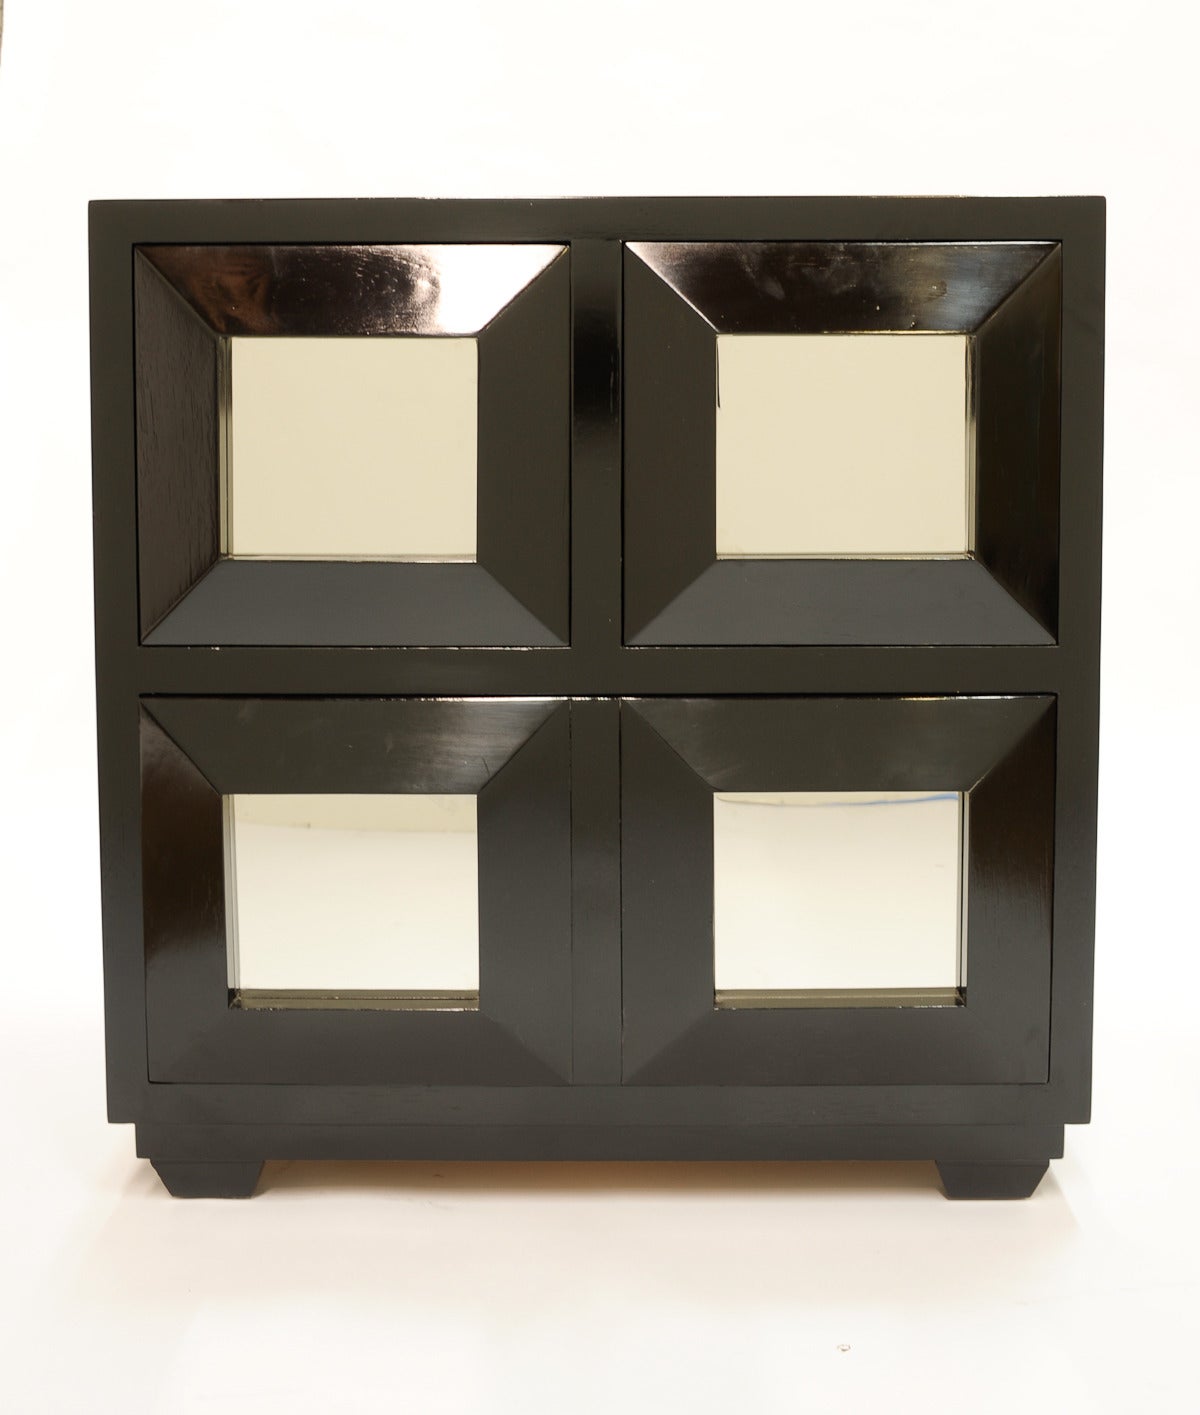 Each chest has two single drawers and a double on the bottom. They are refinished in a black open grain lacquer. The front are mirror polished stainless steel. Wonderful and truly functional for a home or office. They are both bold and refined.